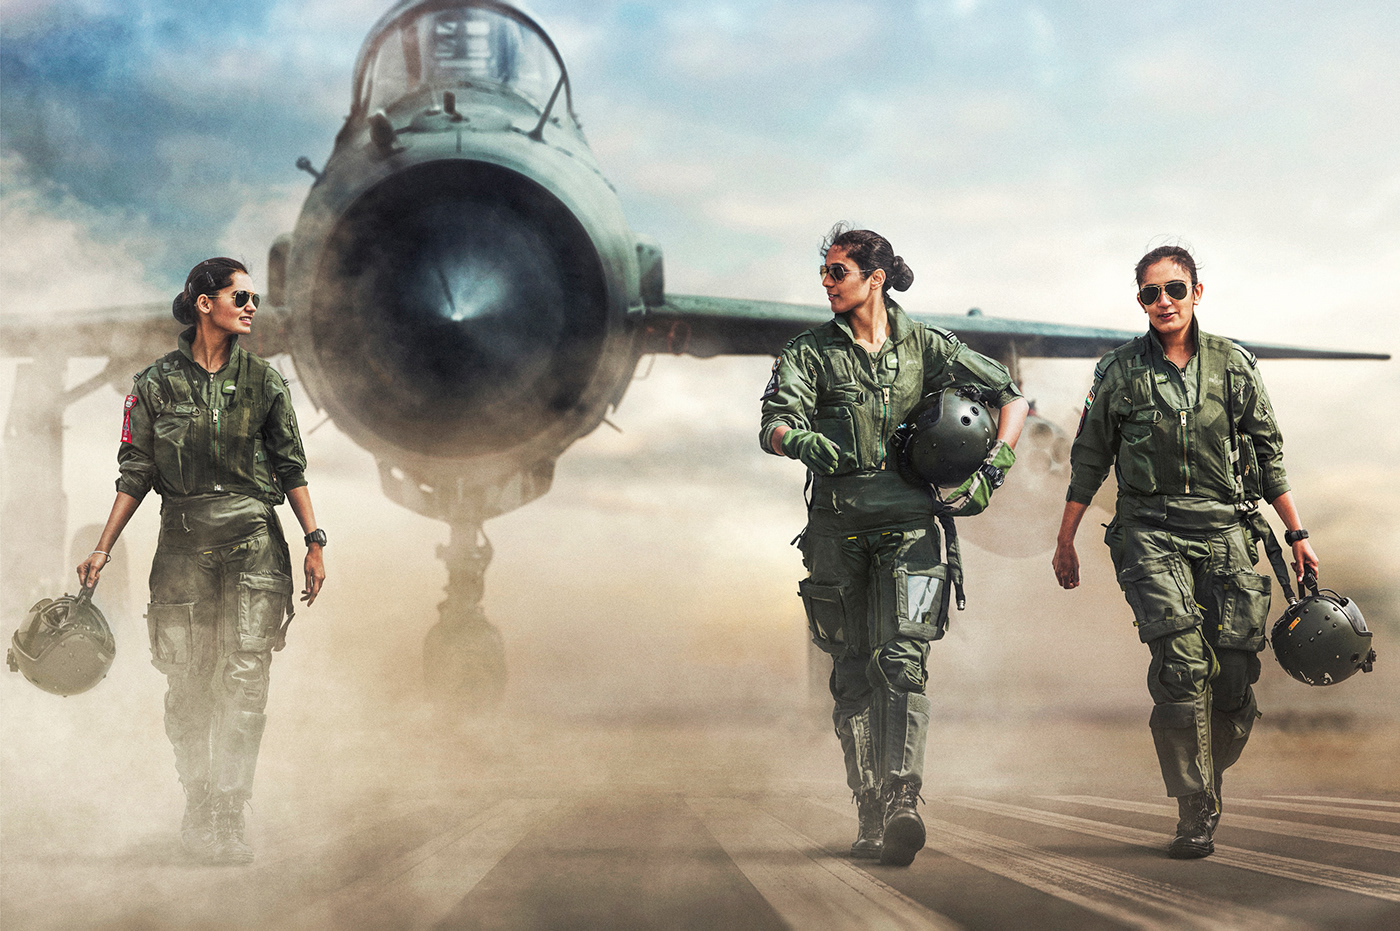 India’s First three women fighter pilots. 